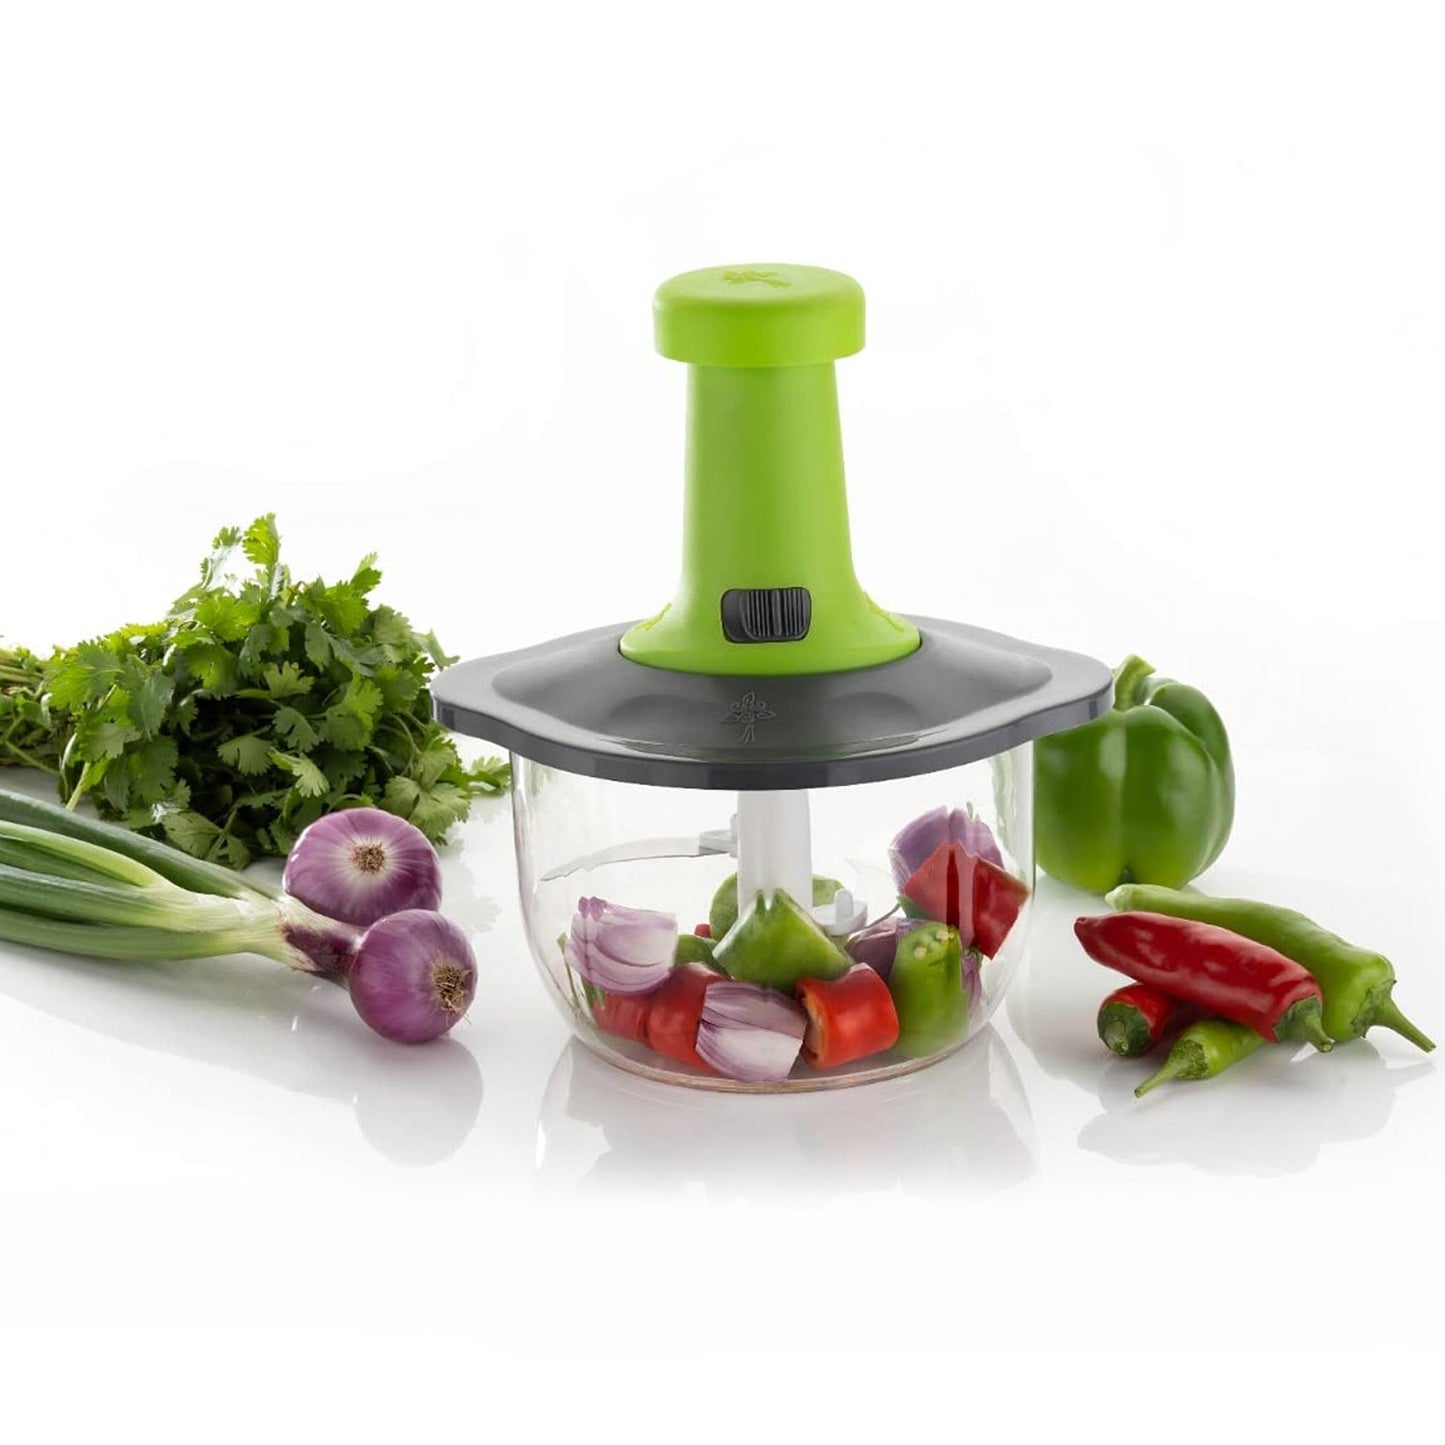 5329  Push Chopper Manual Food Chopper and Hand Push Vegetable Chopper, Cutter, Mixer Set for Kitchen with 3 Stainless Steel Blade DeoDap